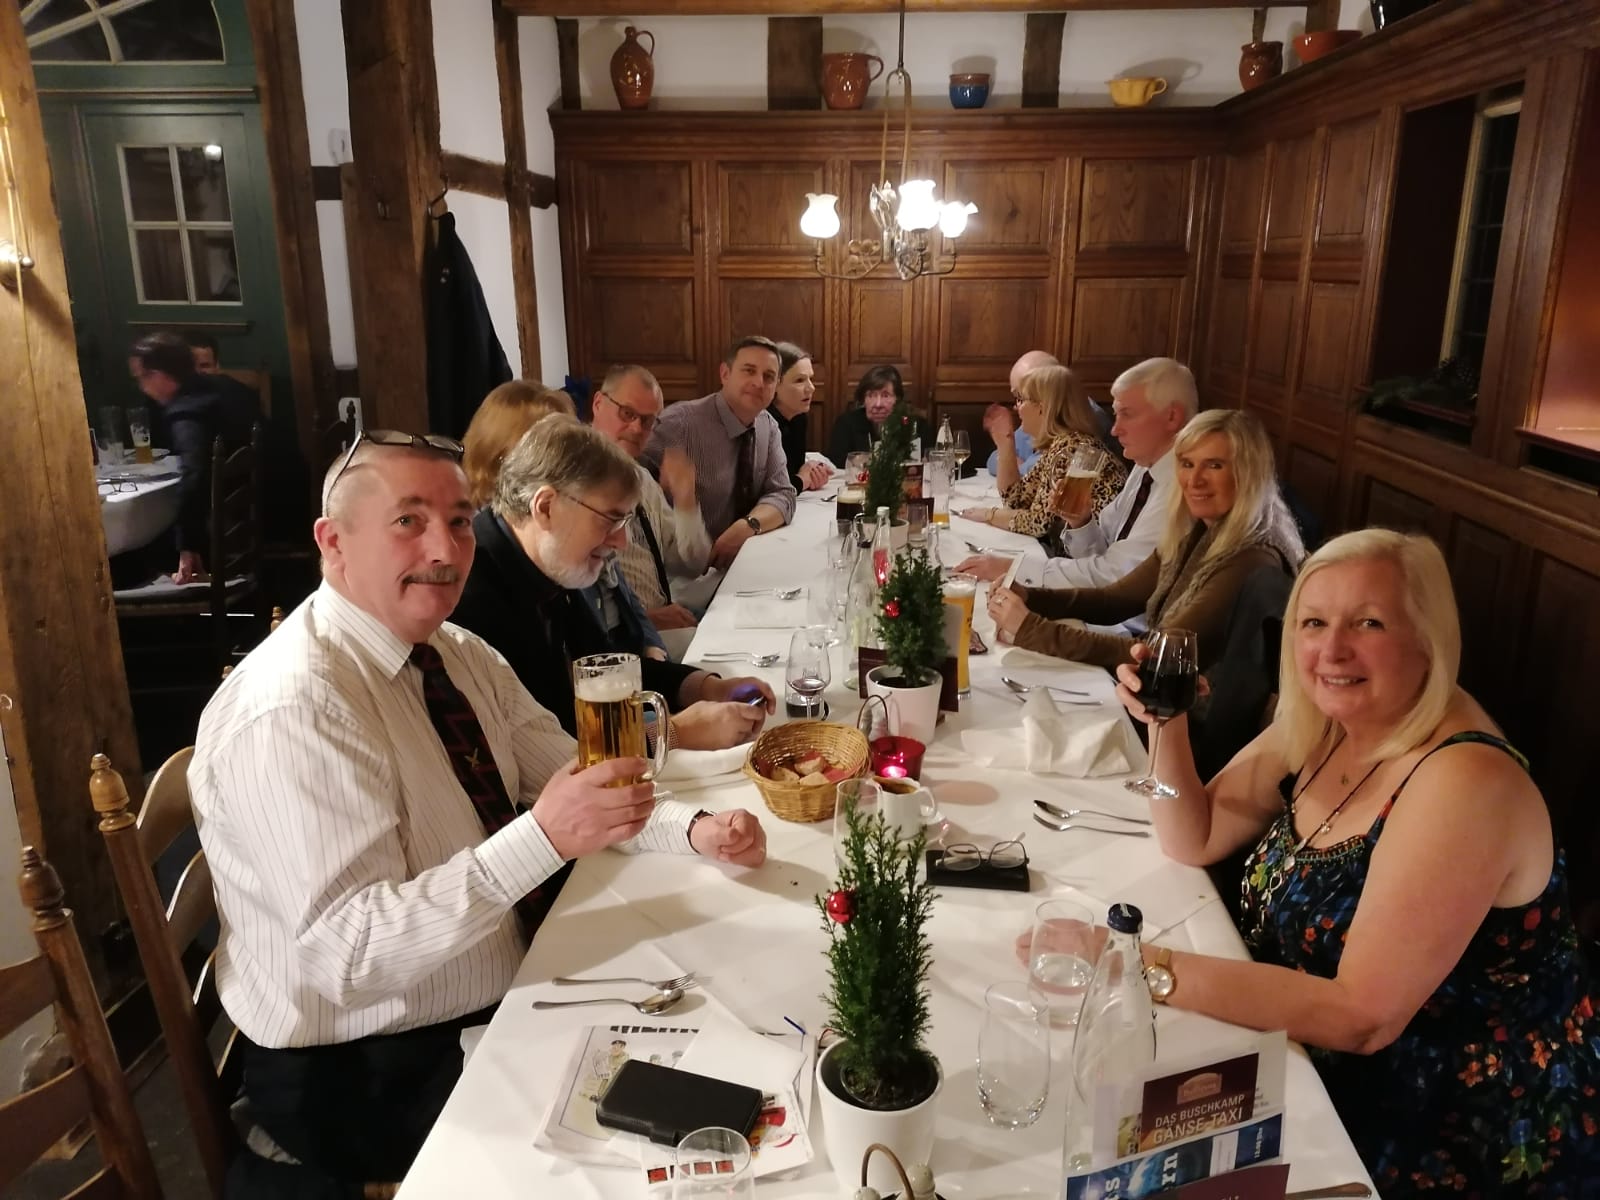 2019 Germany Reunion Dinner group photograph